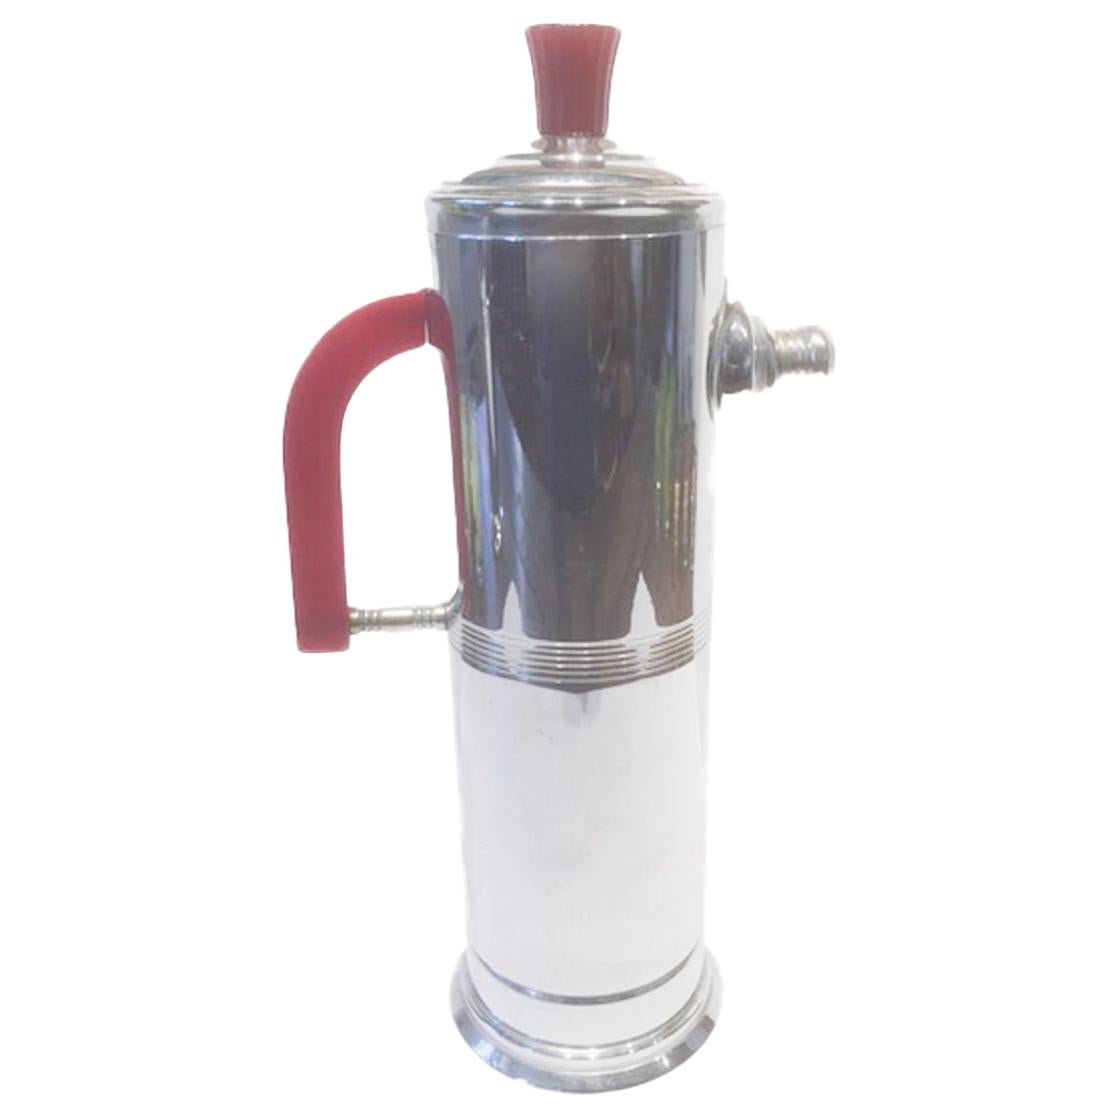 Vintage Chrome Cocktail Shaker with Cherry Red Bakelite Handle and Knob